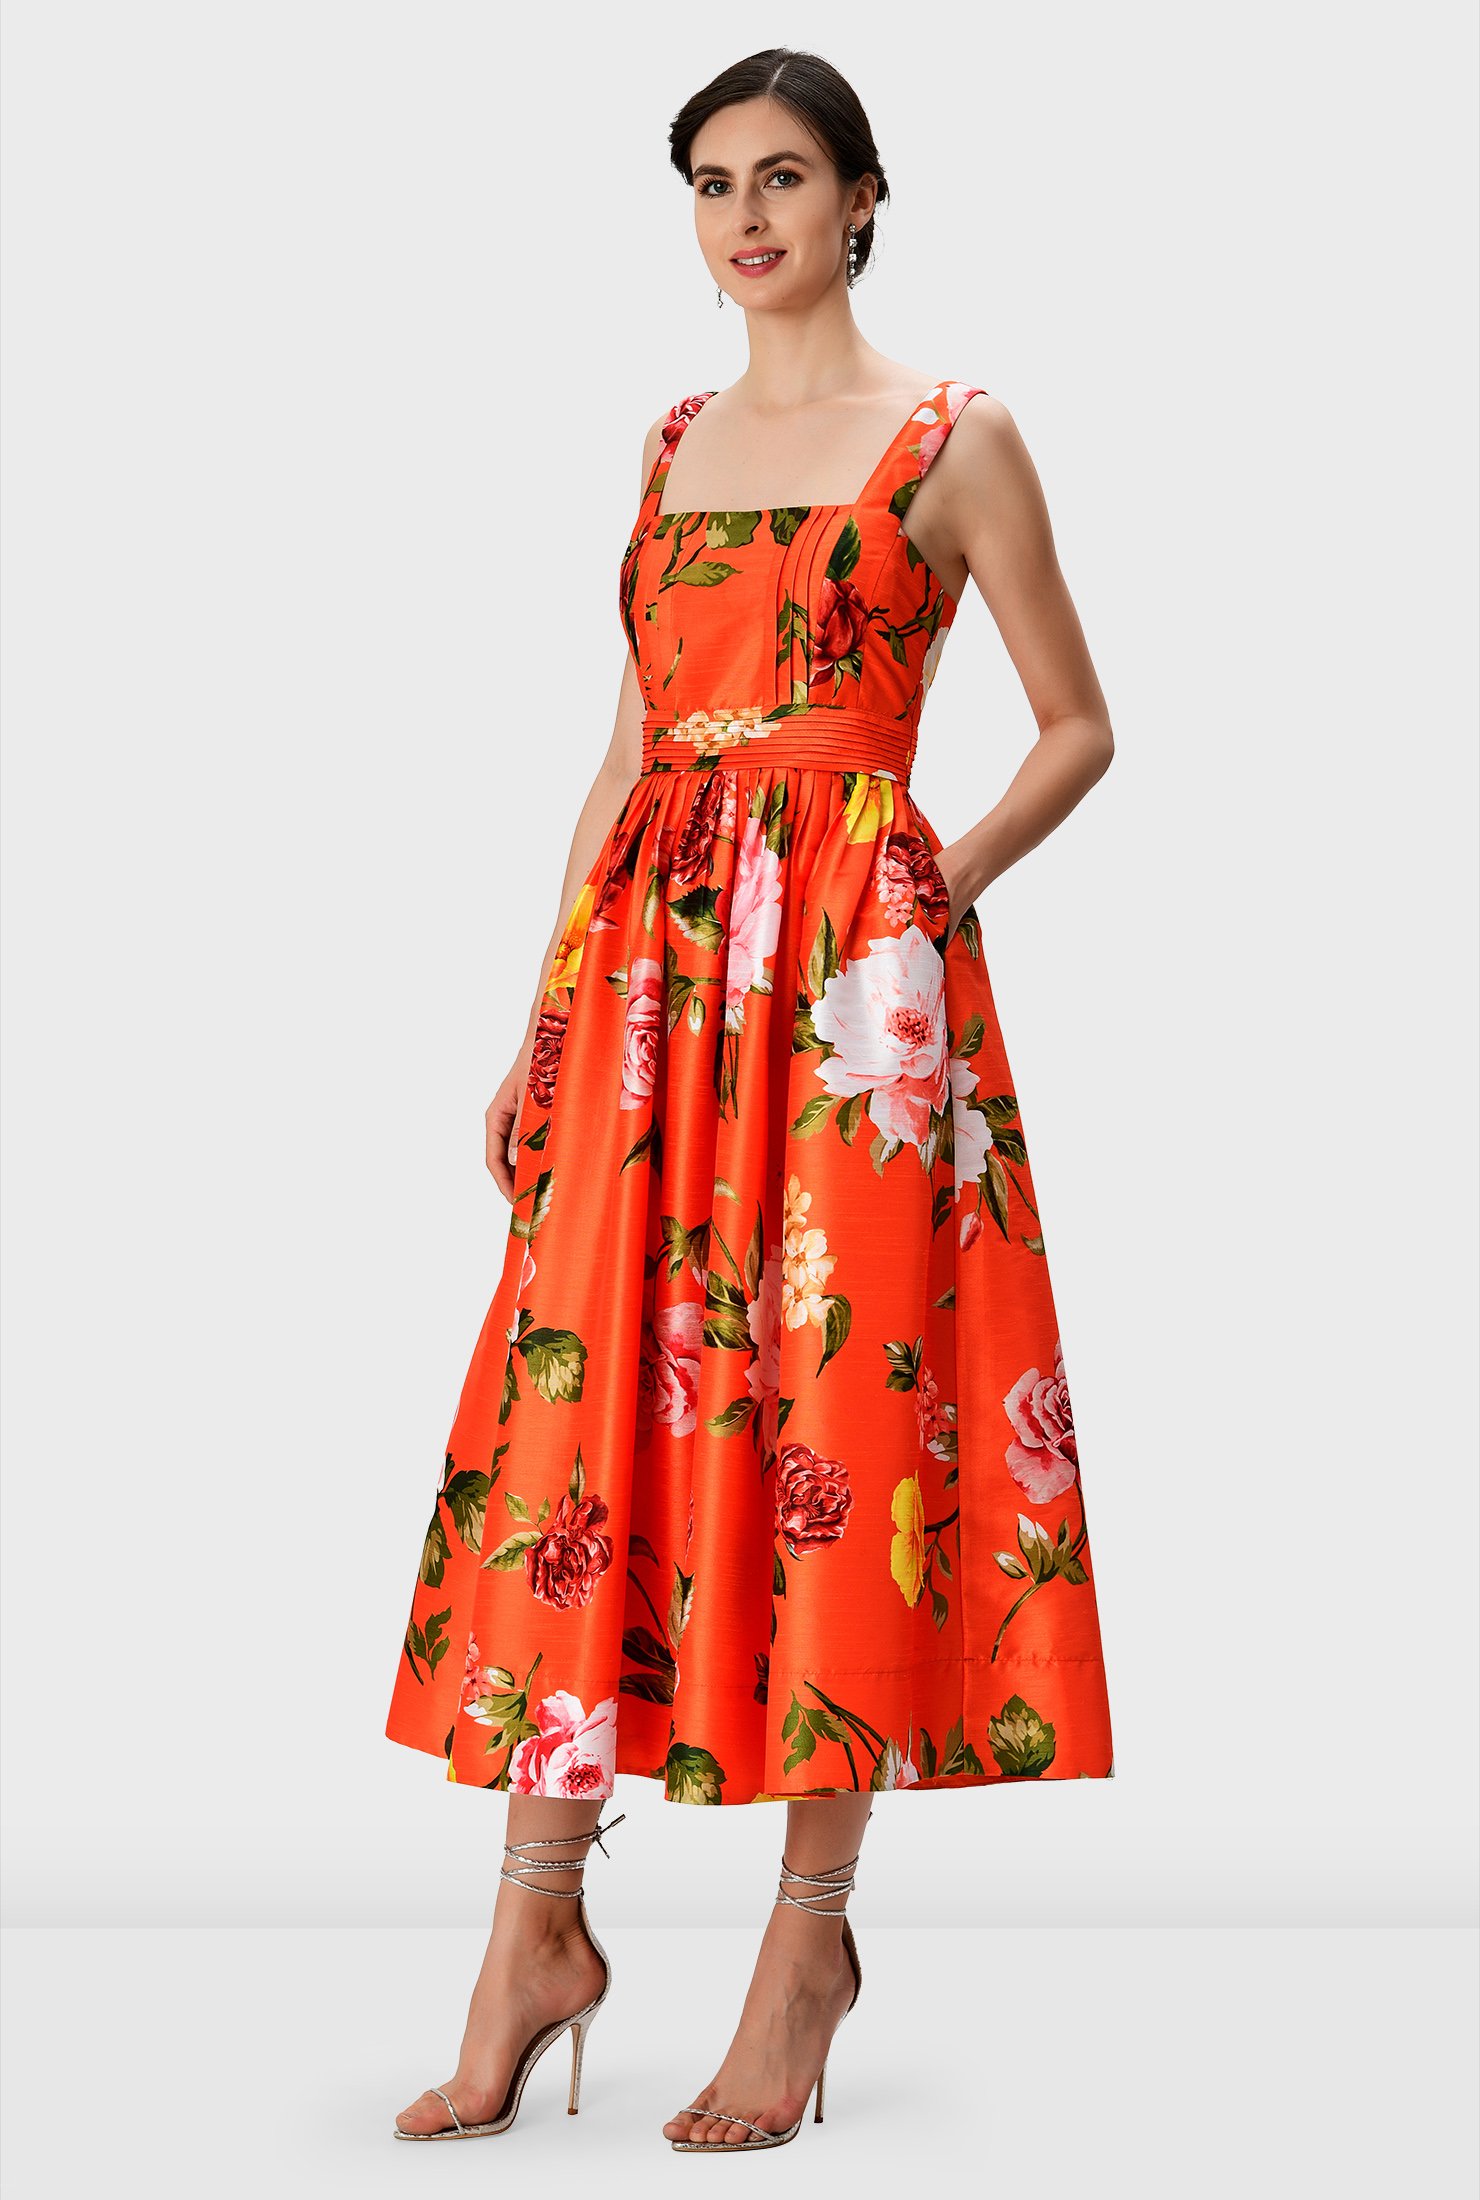 Over-blown bloom print patterns our polydupioni dress in a vibrant hue featuring a fitted bodice and knife pleat full skirt while a pleated waist cinches in the flattering silhouette.